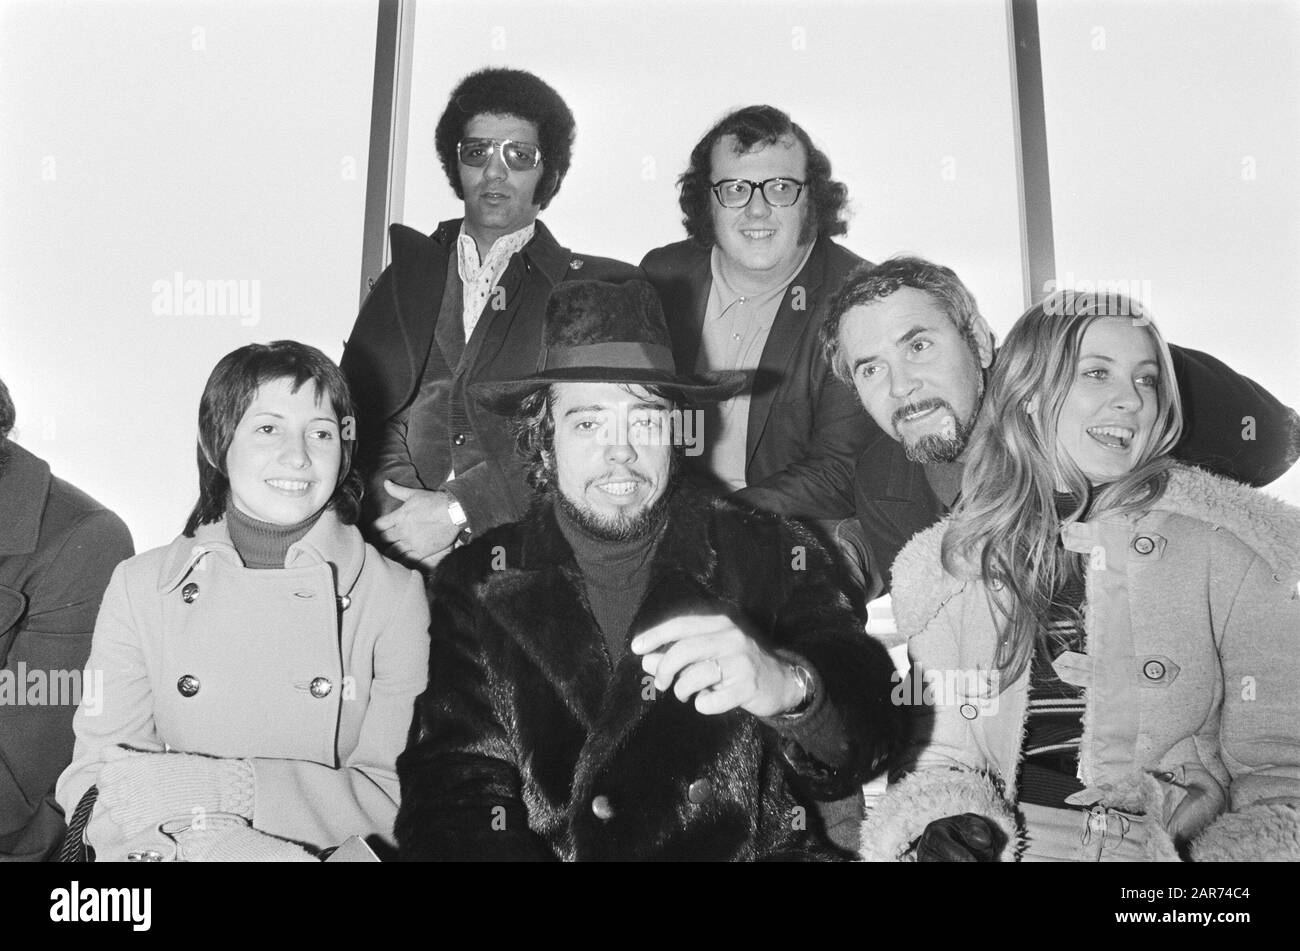 Arrival of Brazilian musician Sergio Mendes and his group on  In the foreground of Gracinha Leporace (wife of Mendes), Sergio Mendes and Karen Philip Date: March 5, 1971 Location: Noord-Holland , Schiphol Keywords: arrivals, musicians, airports, singers Personal name: Leporace, Gracinha, Mendes, Sergio, Philip, Karen Stock Photo